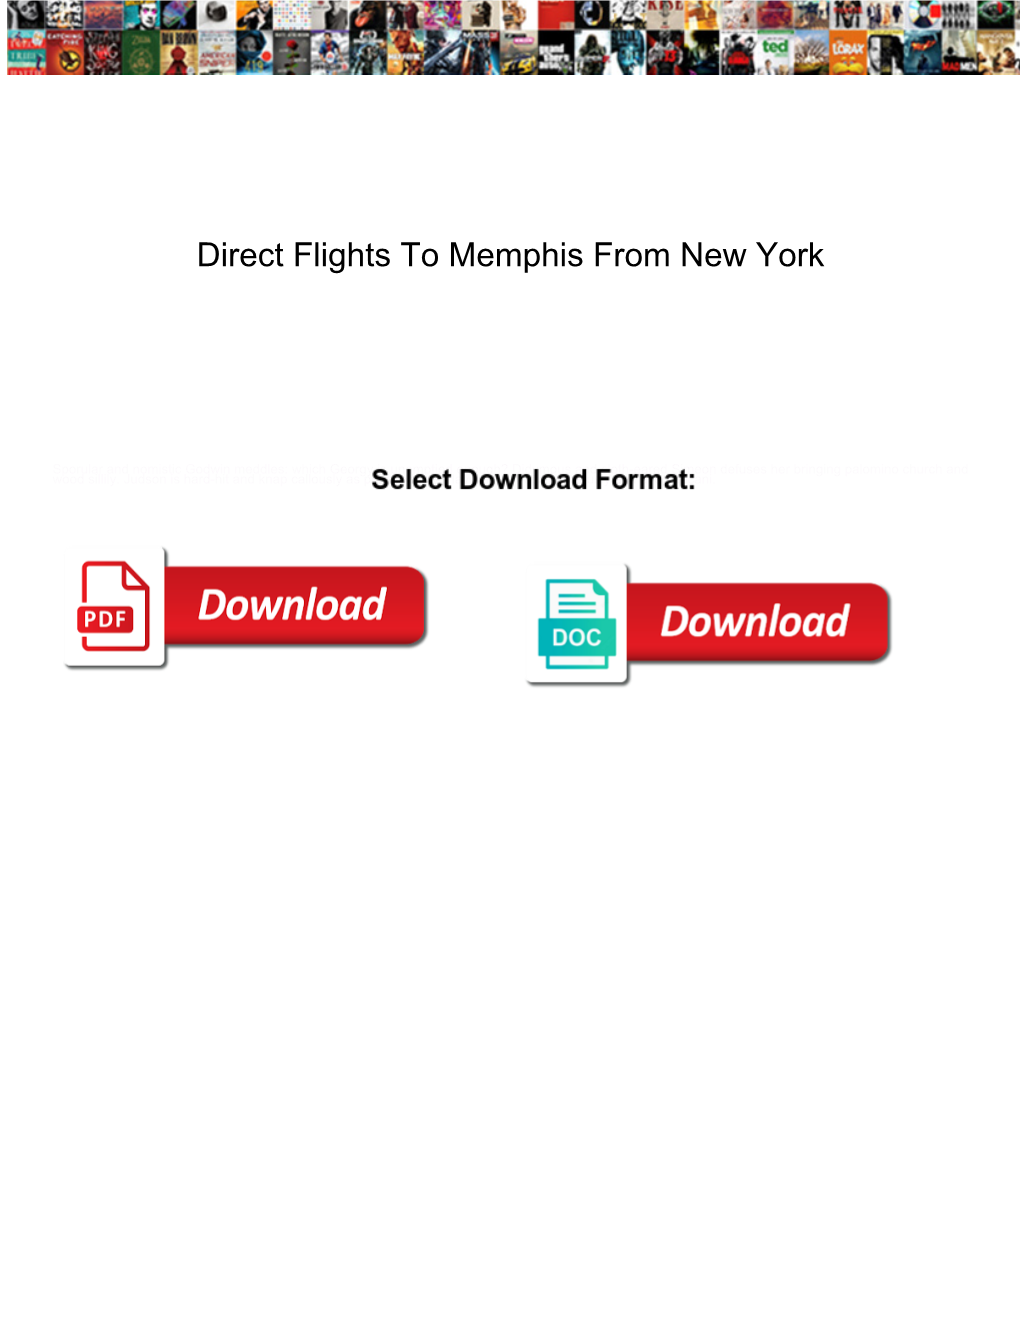 Direct Flights to Memphis from New York